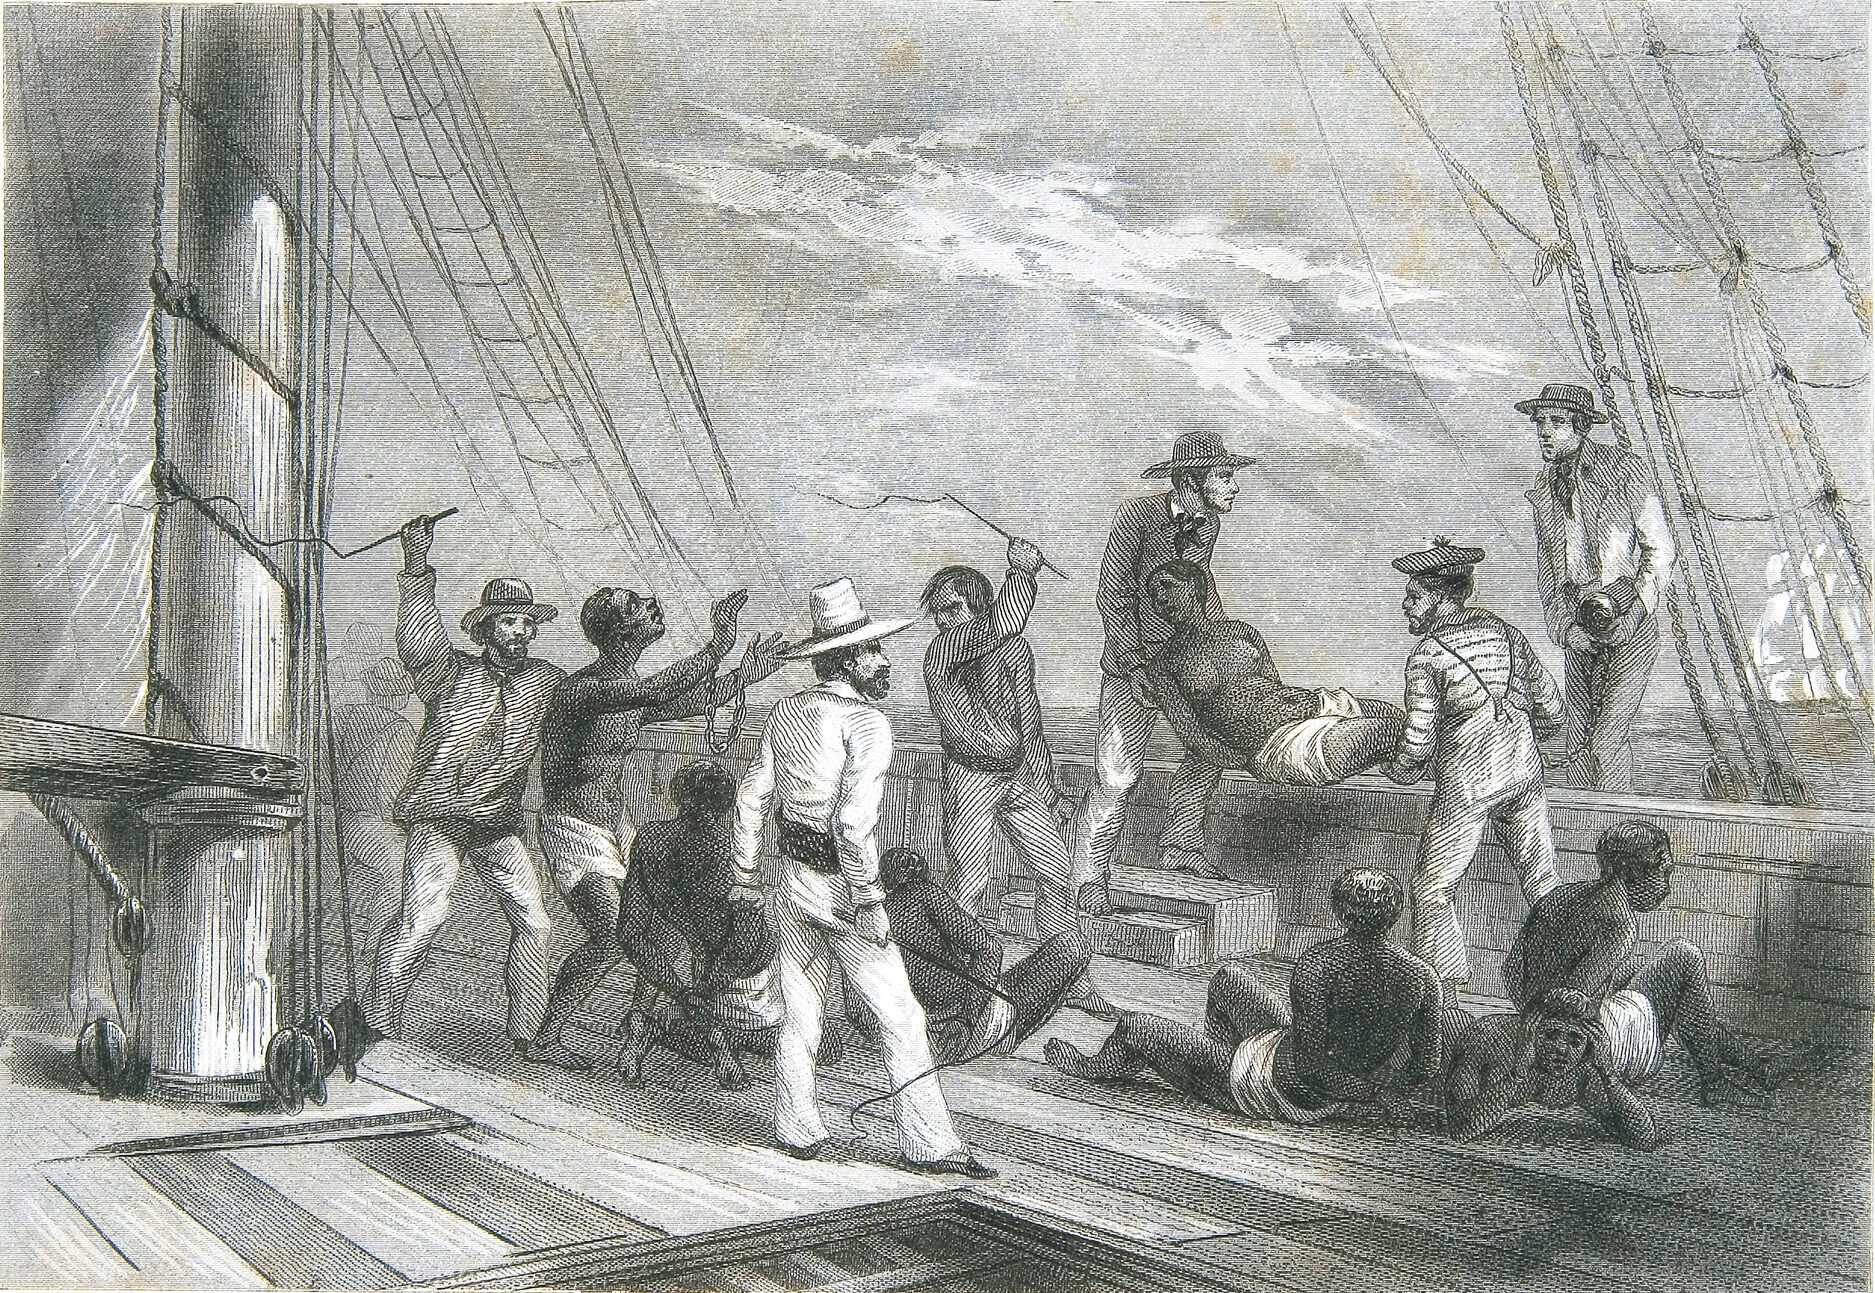 Illustration of the horrible conditions on slave ships